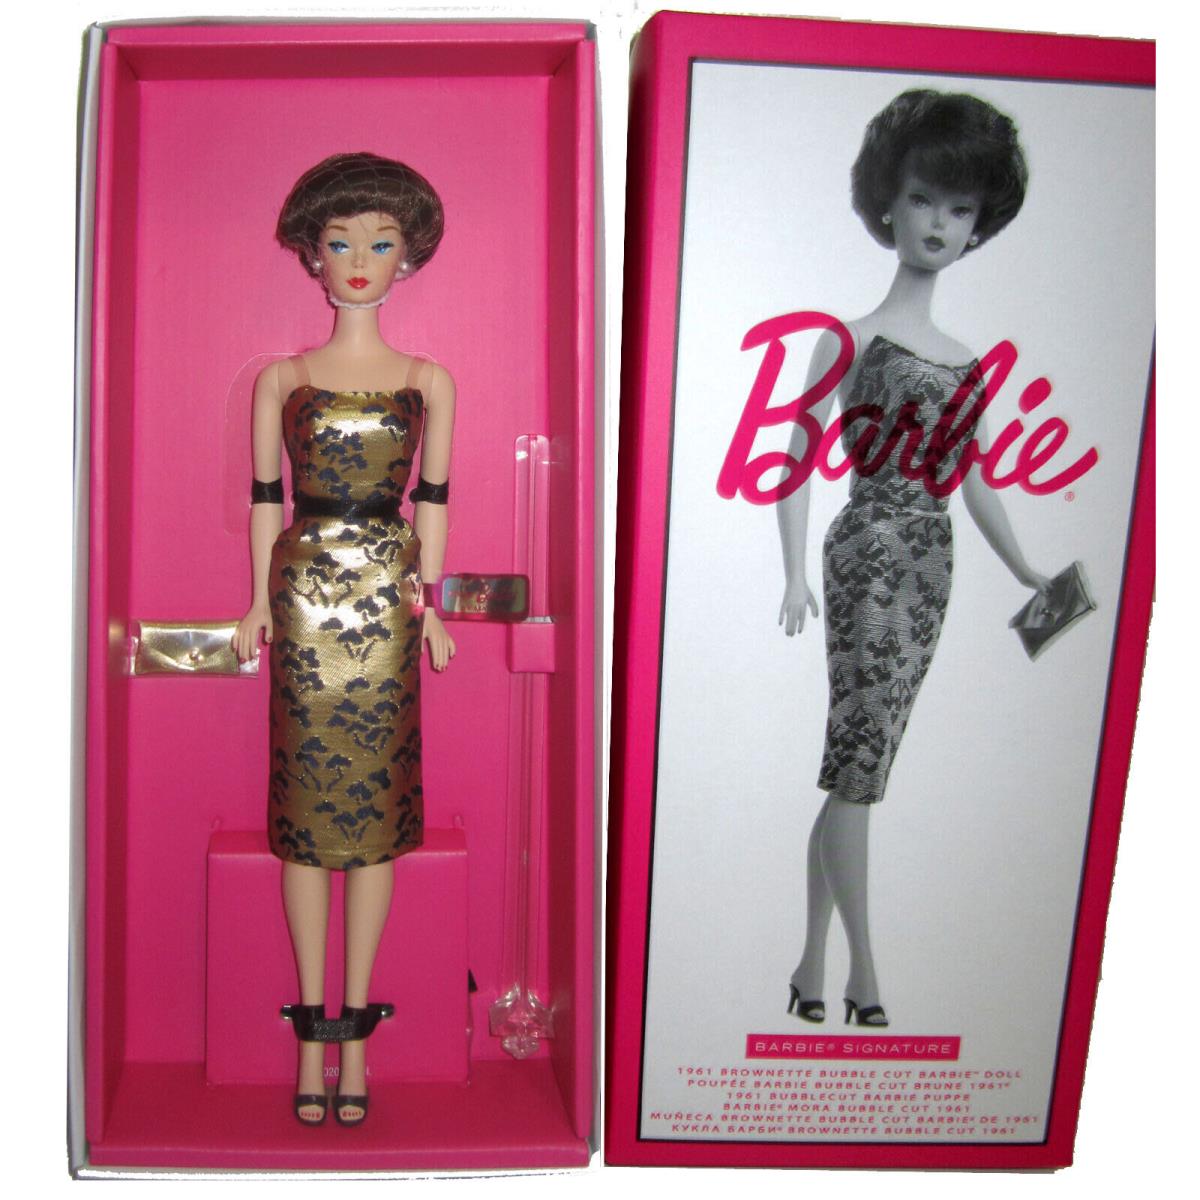 Silkstone Barbie Repro 1961 Brownette Bubble Cut with Gold Navy Lame Sheath Nrfb